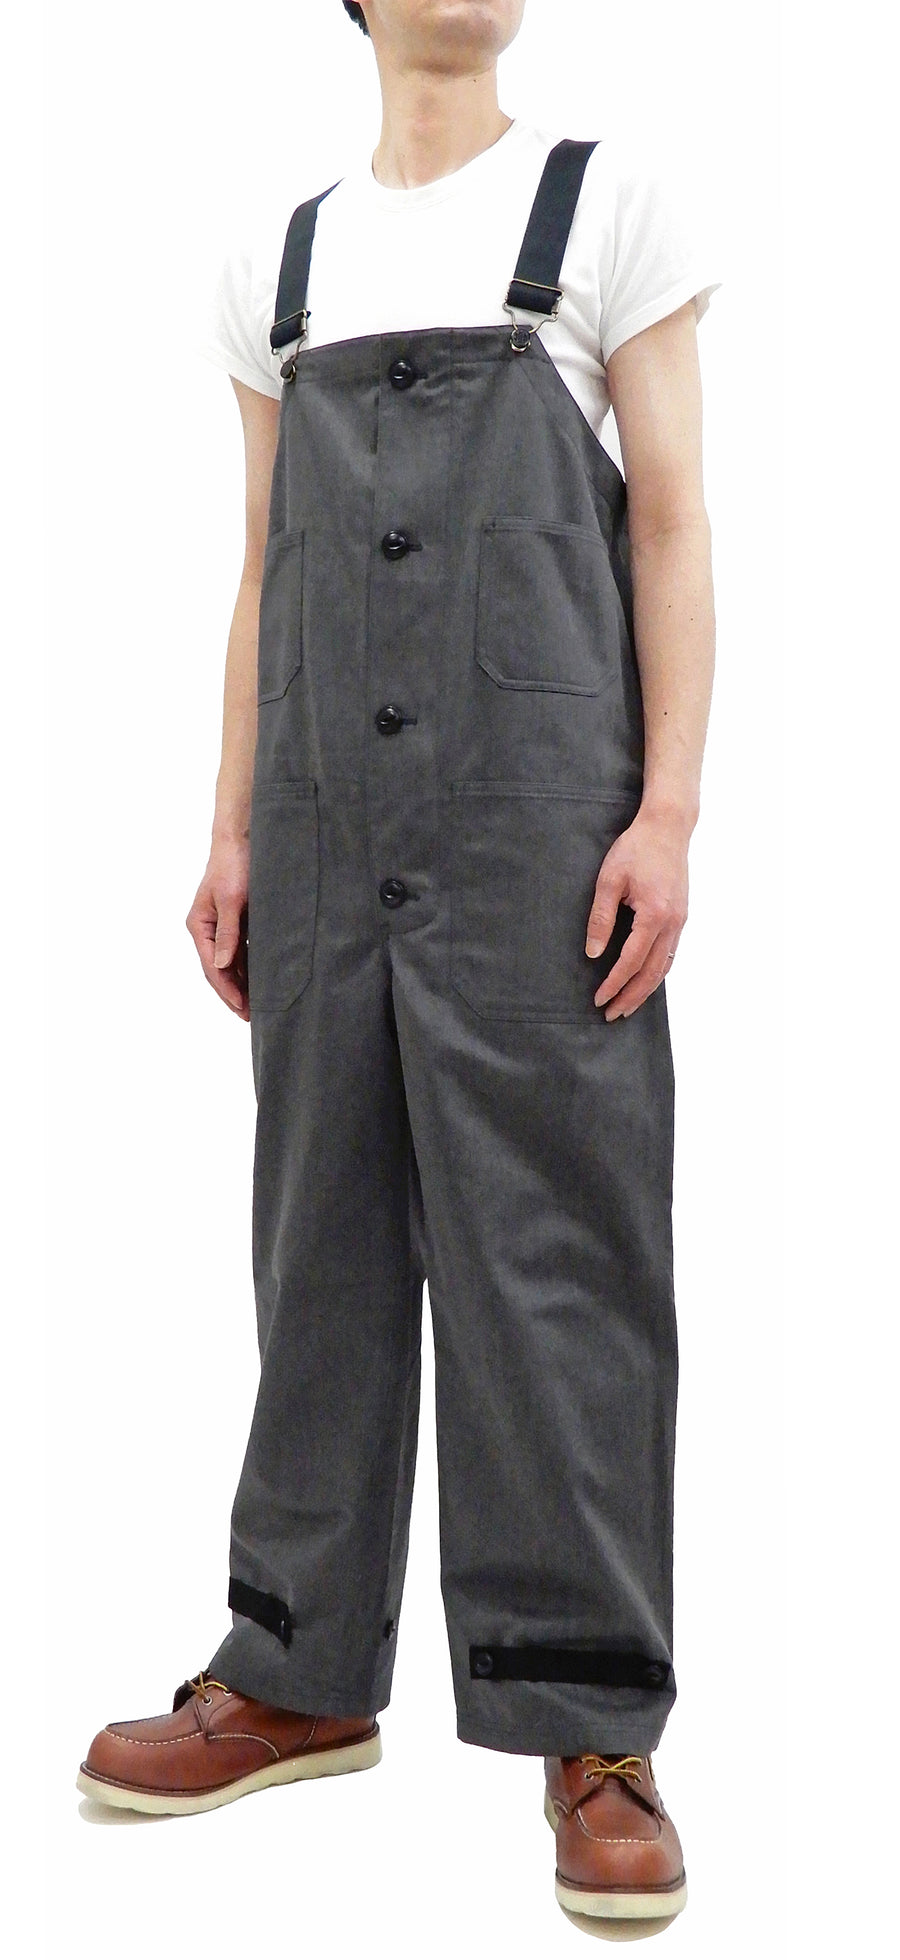 Samurai Jeans Overalls Men's USN Deck Pants Military Style Overall SWC605TC20-HT Heather-Gray